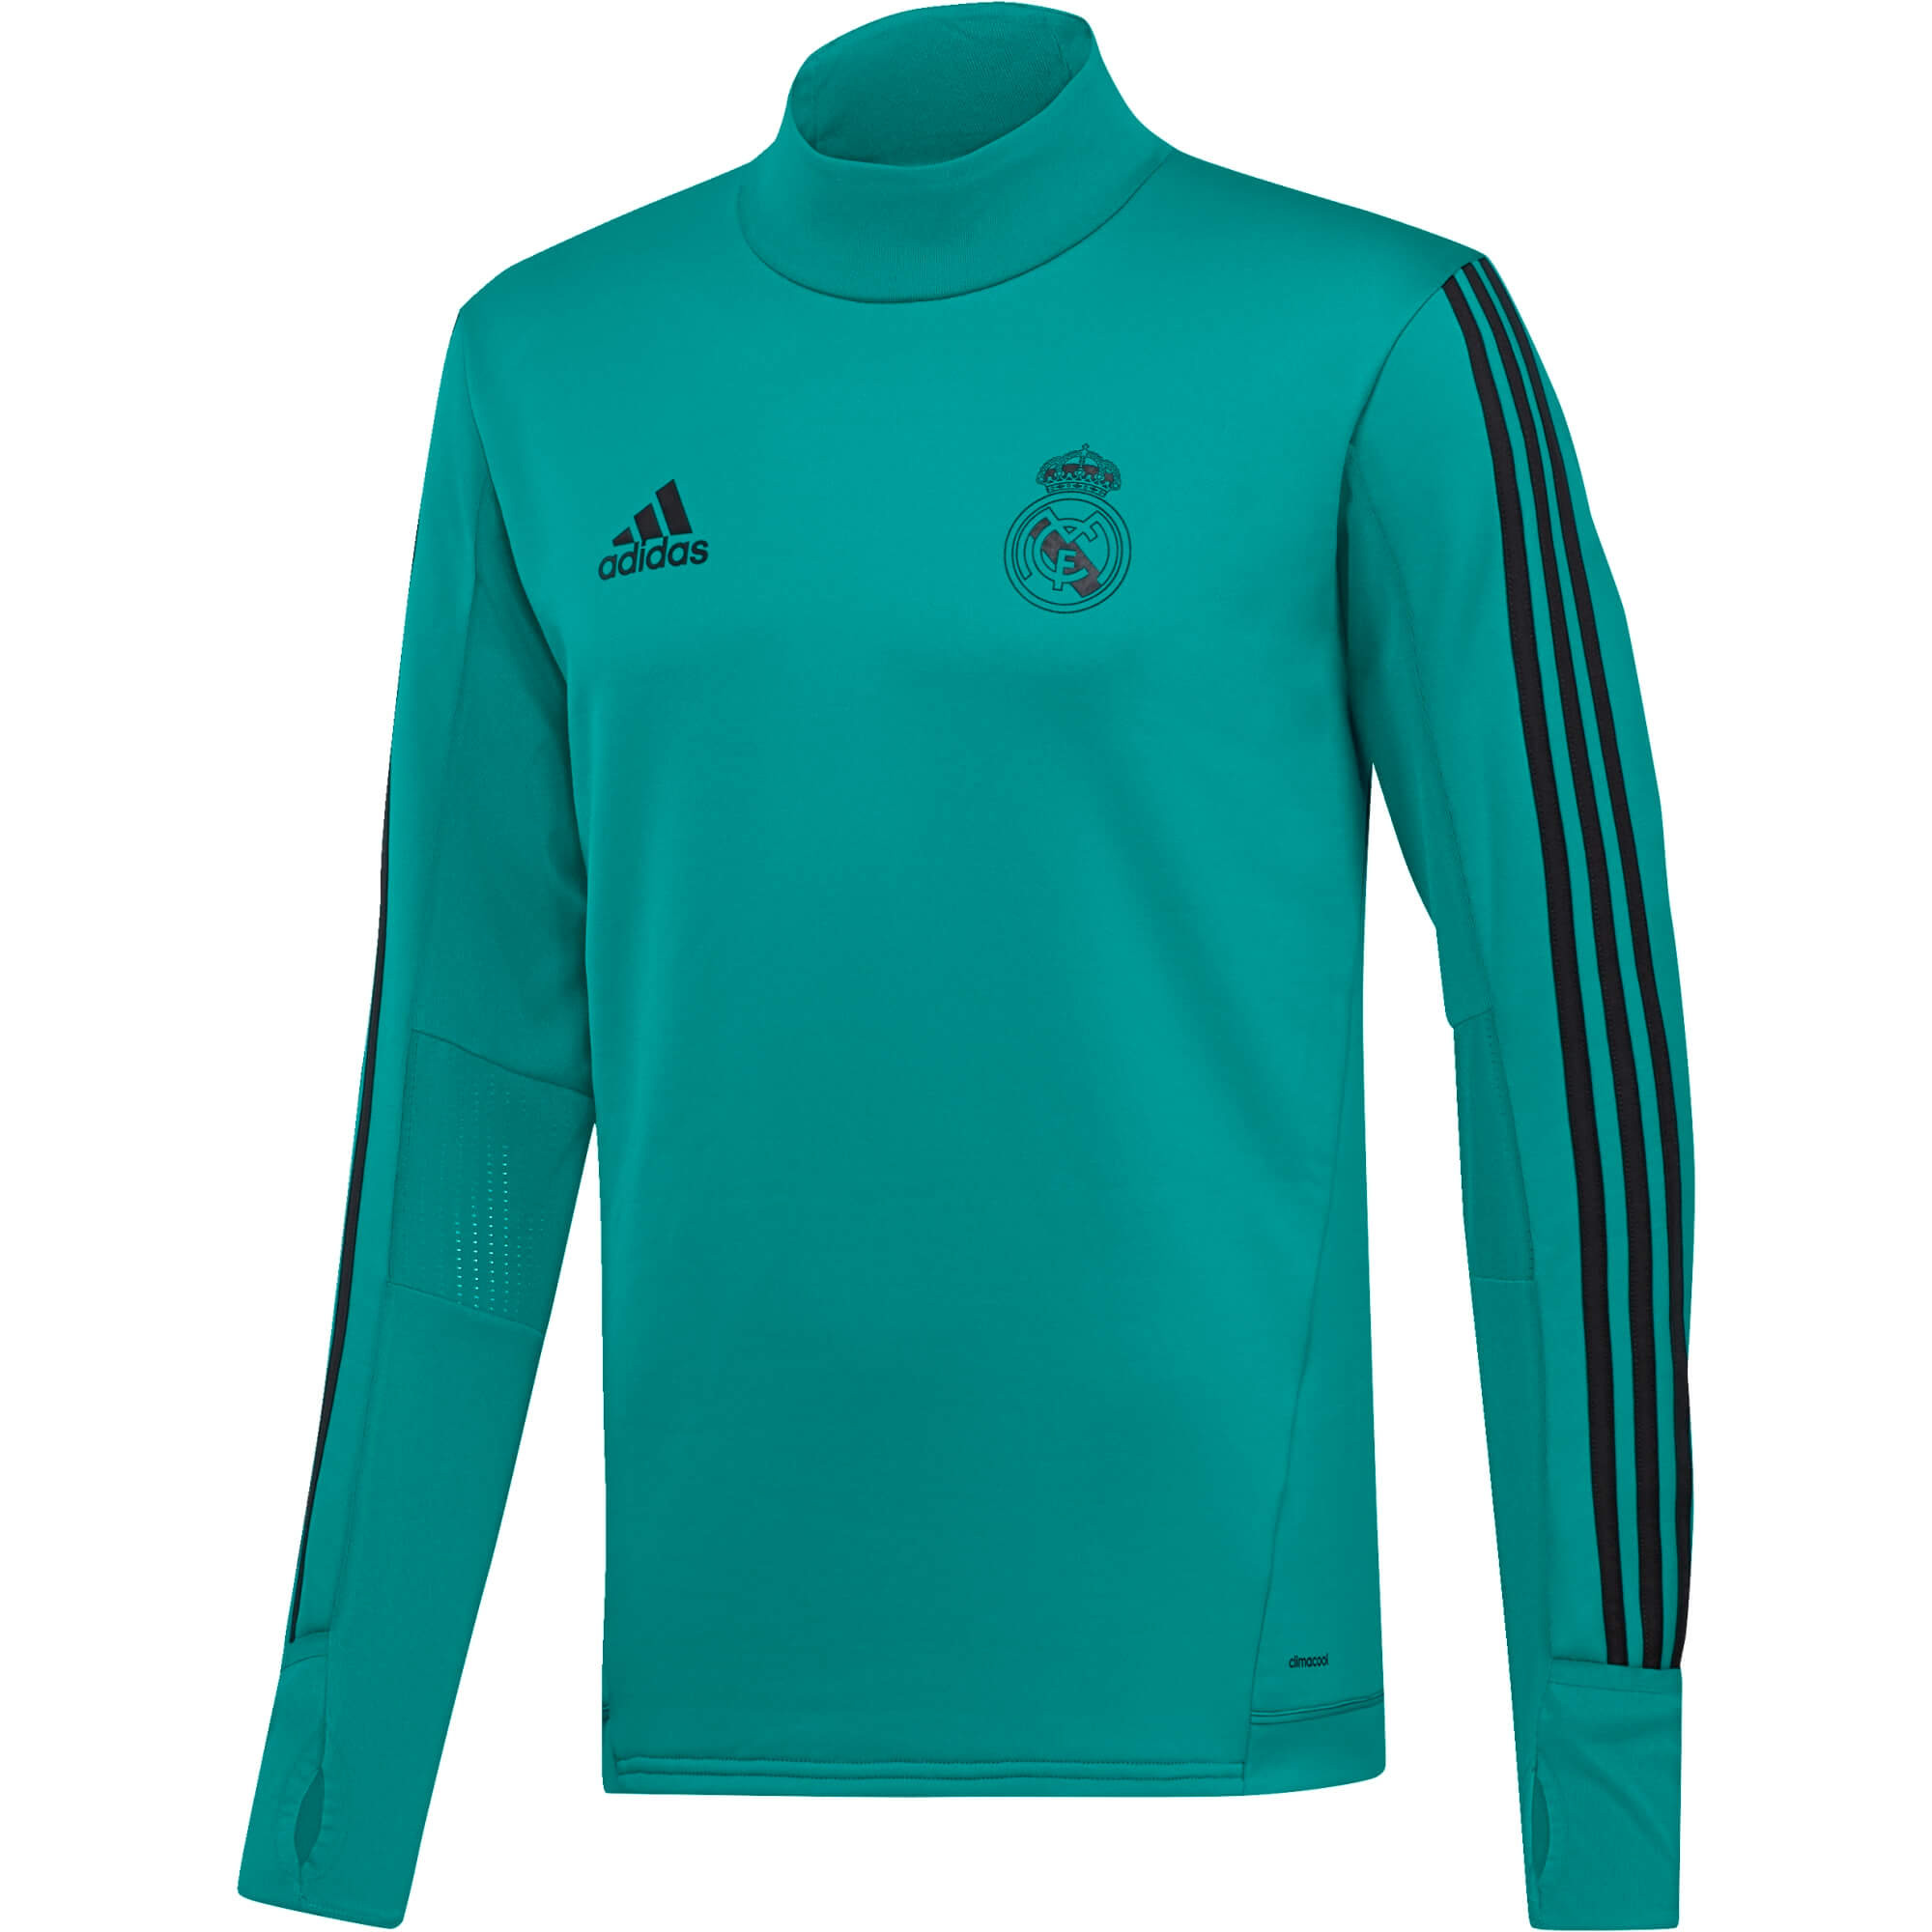 ADIDAS REAL MADRID TRG TOP JUNIOR TURQUOISE 2018